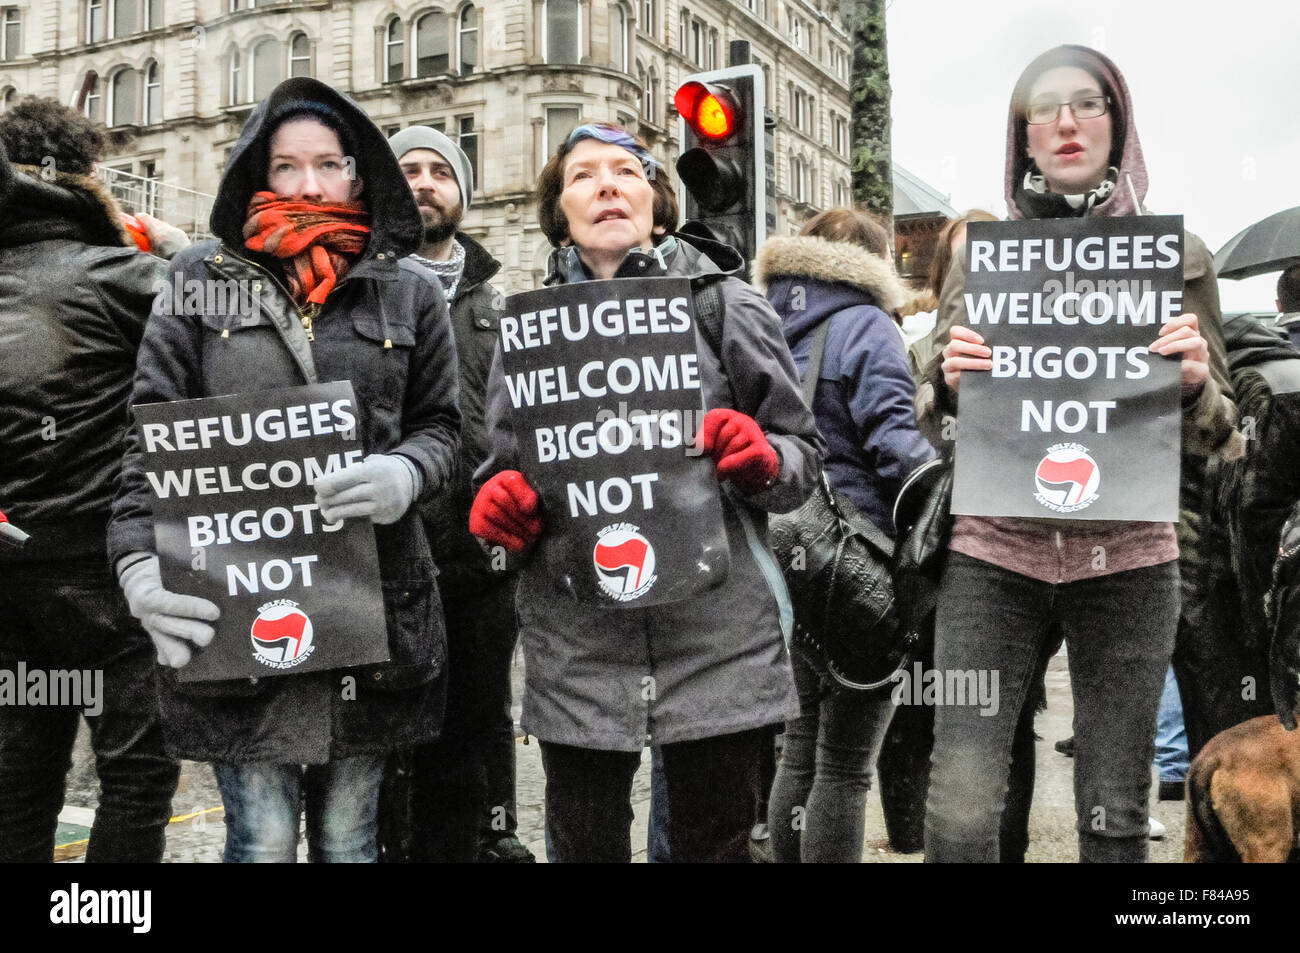 Belfast, Northern Ireland. 05 Dec 2015 - Pro-refugee supporters gather to protest against the Protestant Coalition's anti-refugee rally. Credit:  Stephen Barnes/Alamy Live News Stock Photo